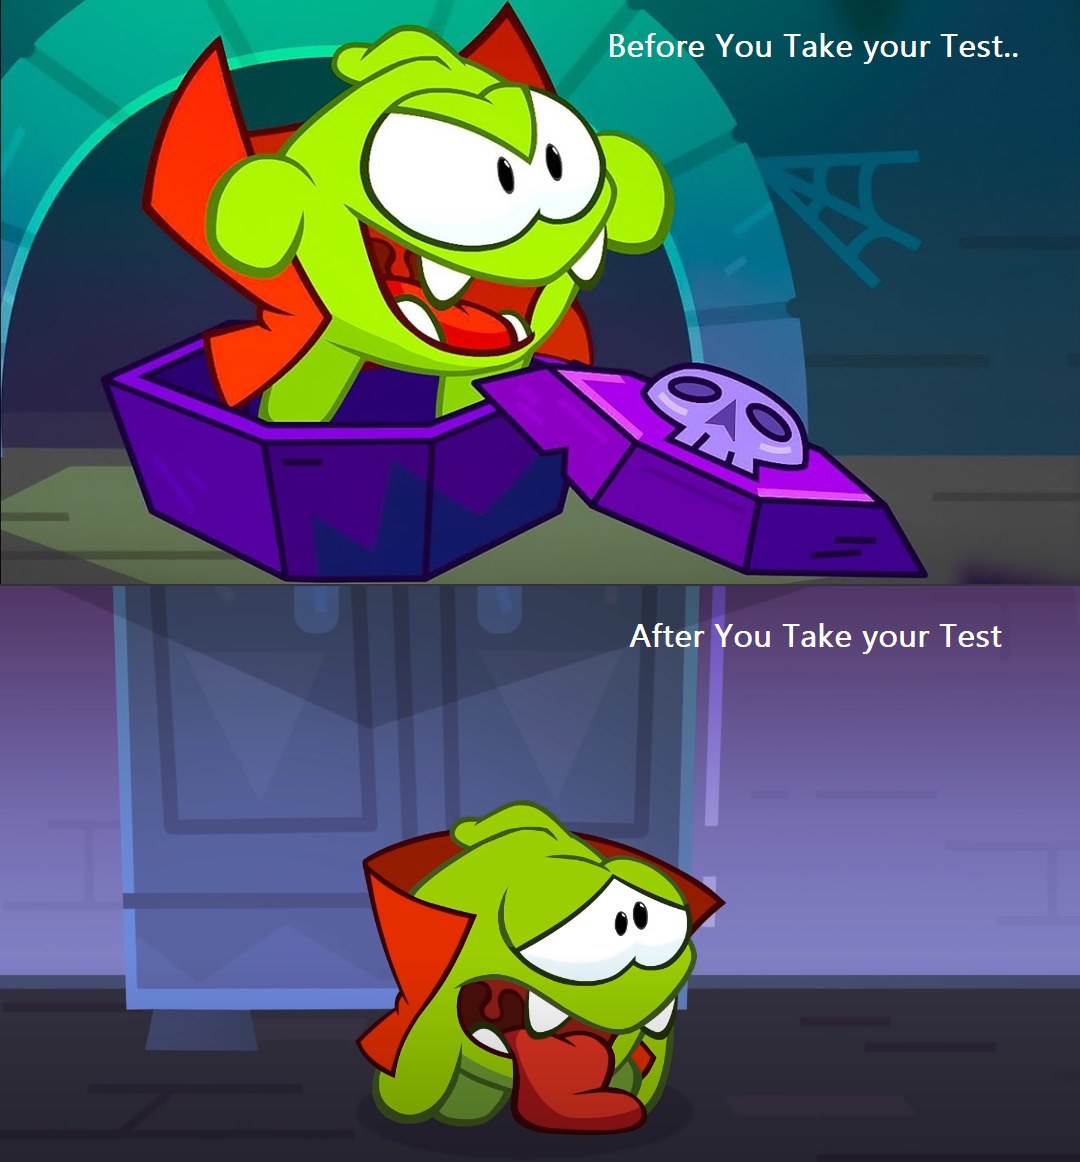 Om Nom Meme Before And After You Take Your Test By Xavier0817 On Deviantart